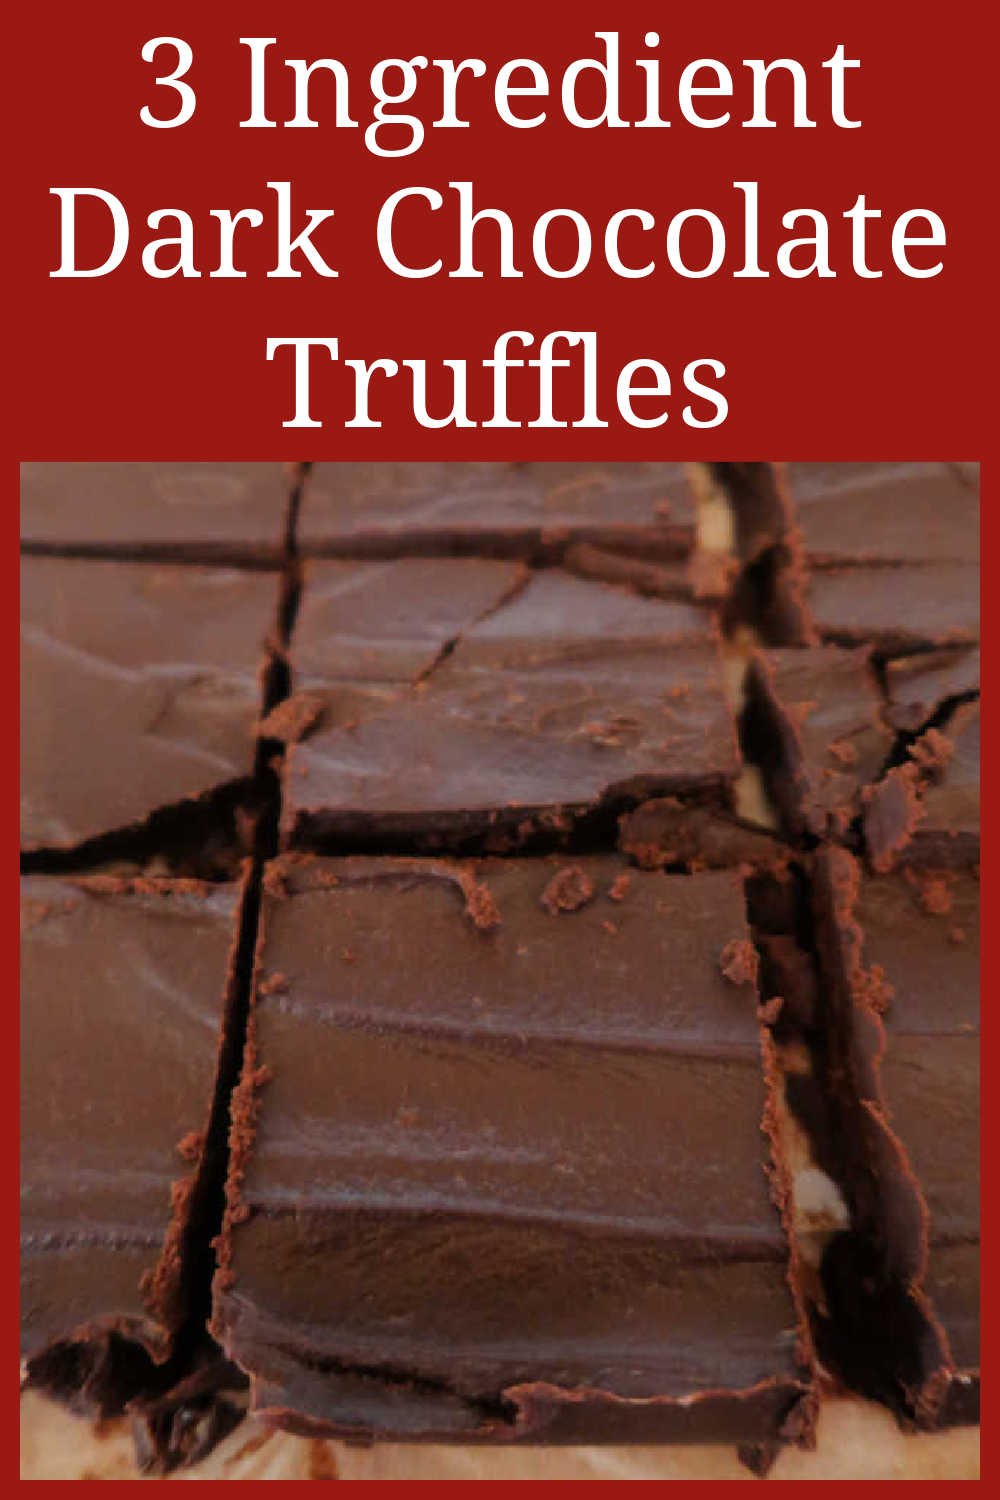 Dark Chocolate Truffles Recipe - How to make the best easy homemade truffle dessert with only 3 ingredients - with the video tutorial.